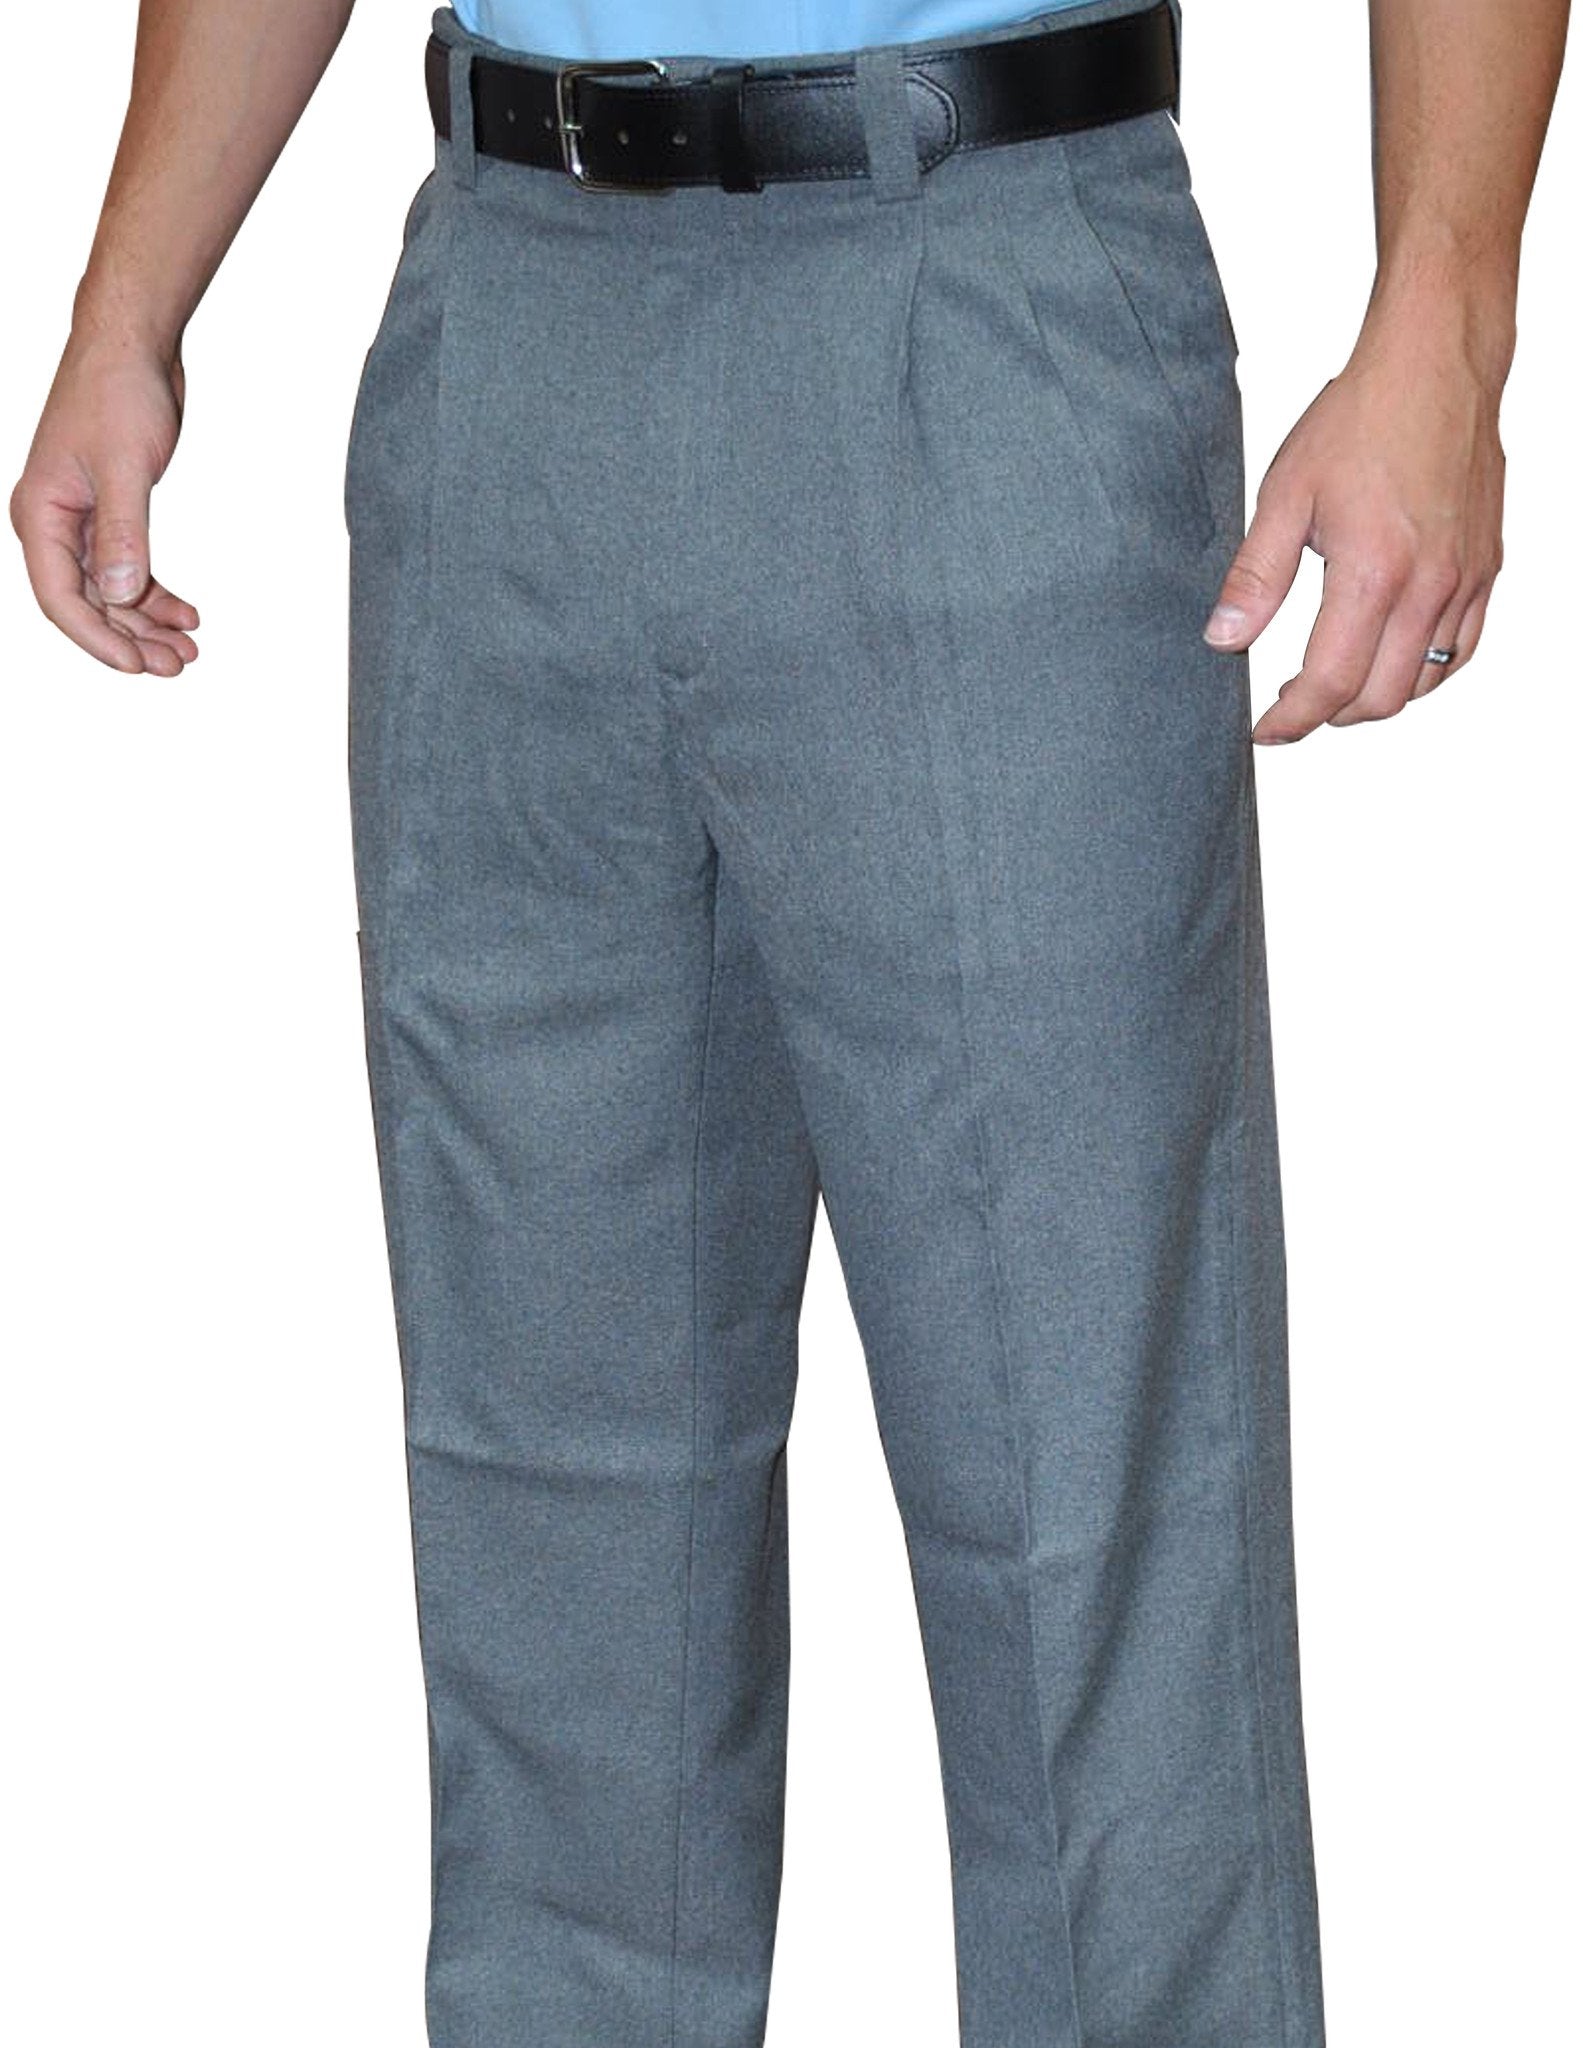 BBS371-Smitty Pleated Combo Pants - Available in Heather and Charcoal Grey